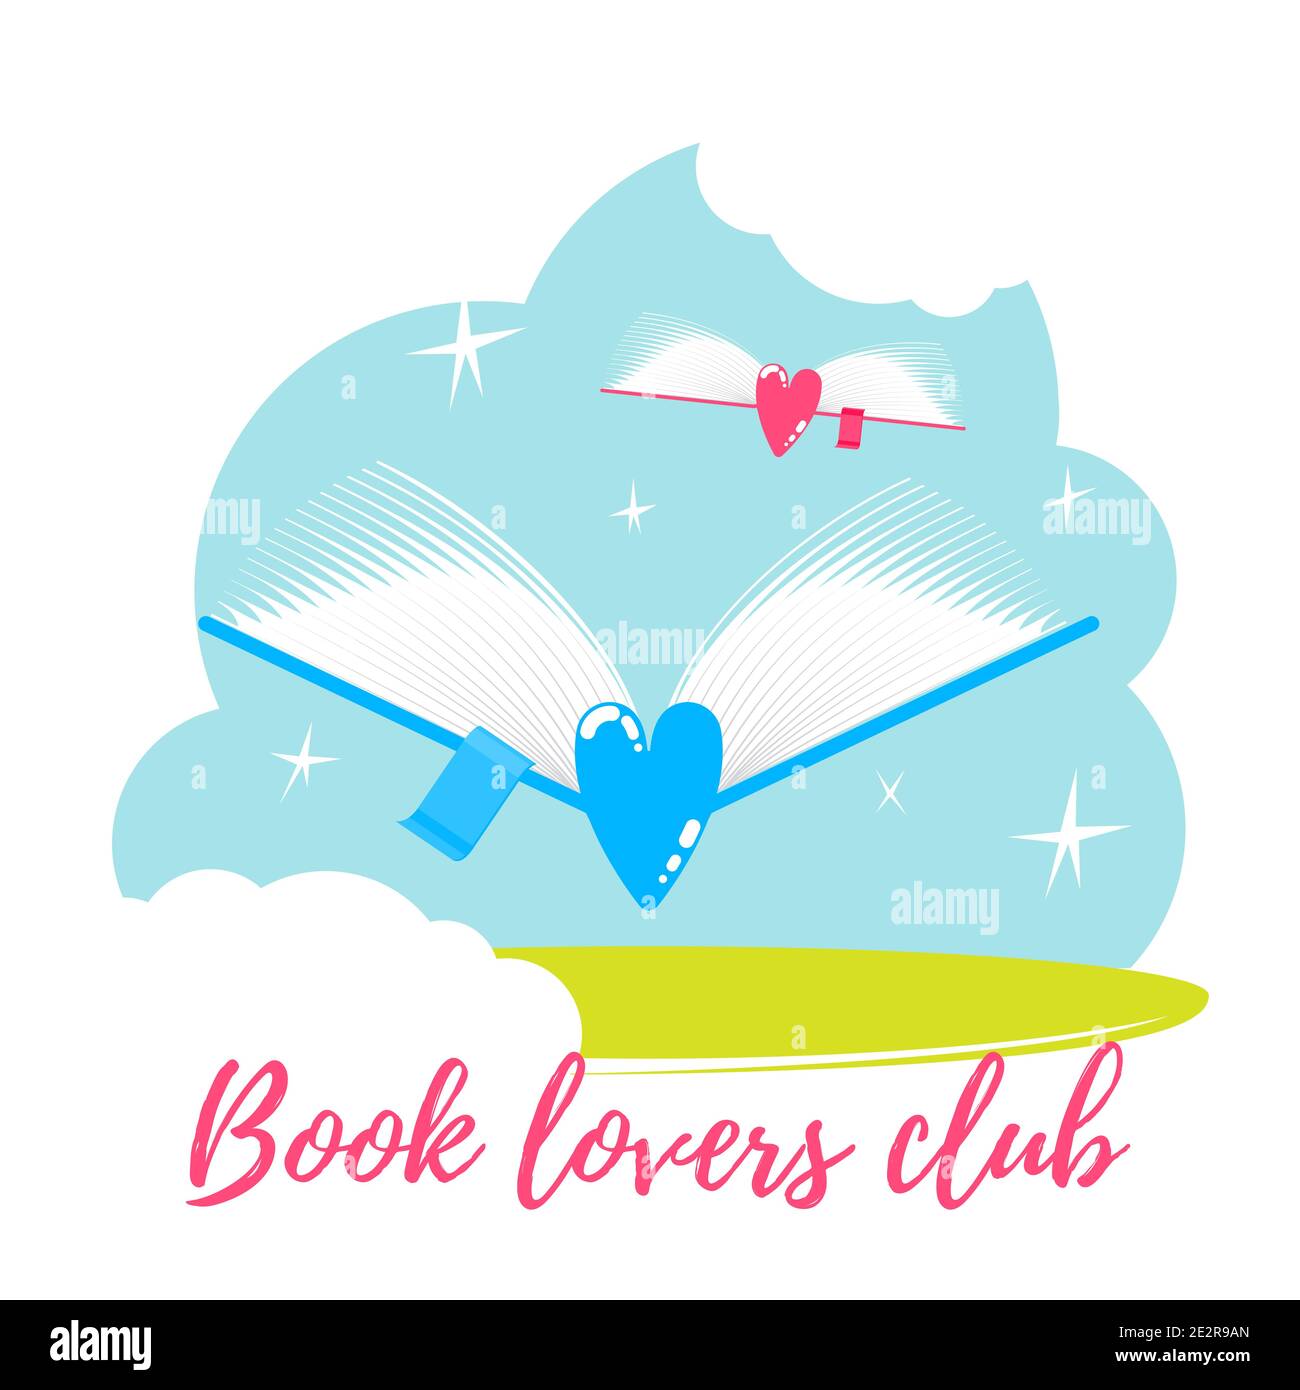 Modern Book Lover illustration. Flying books with hearts in the sky. Stock Vector